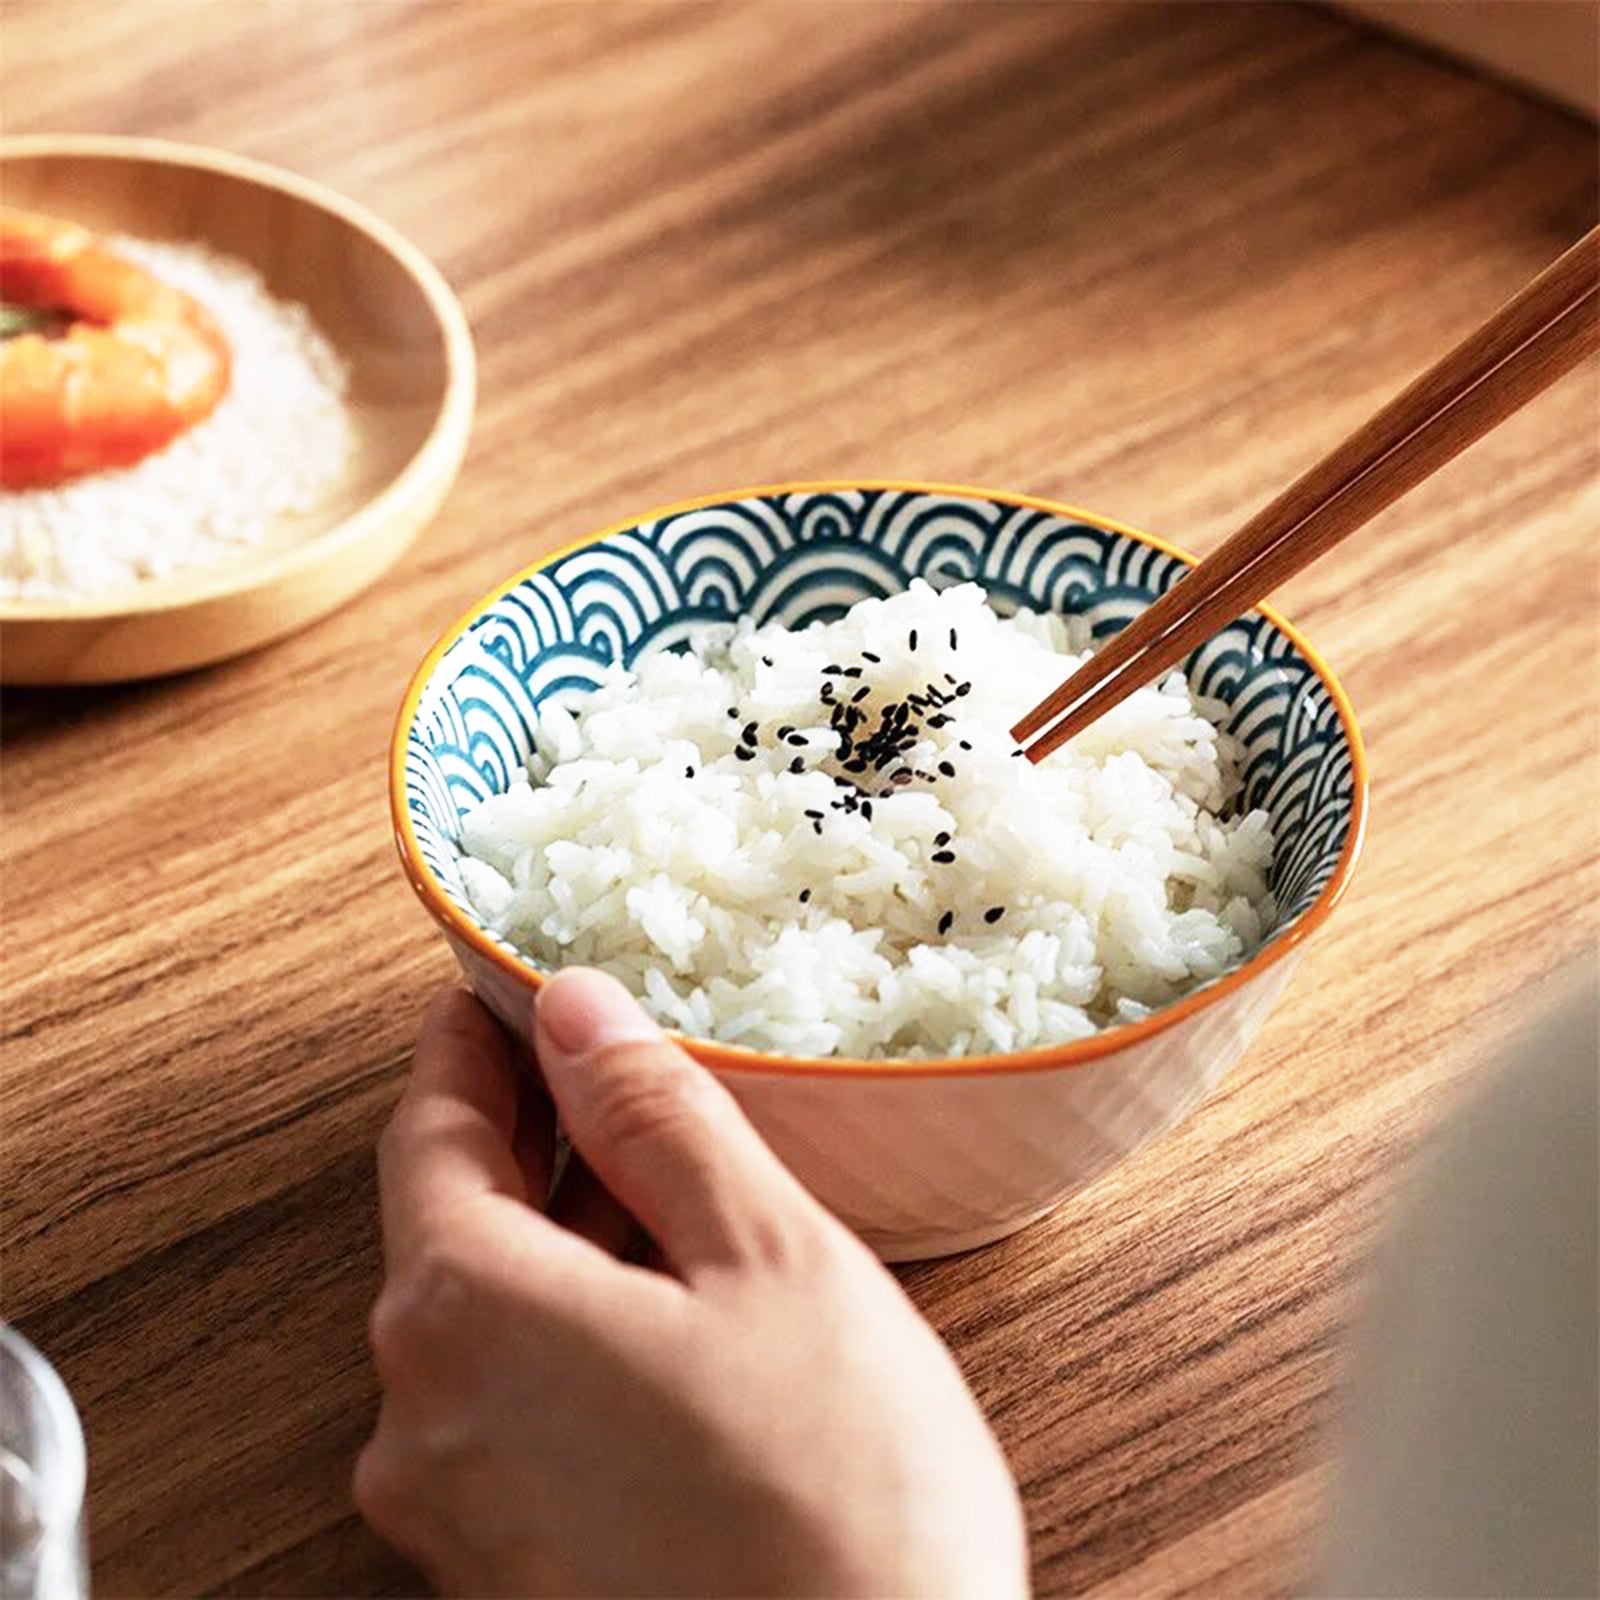 Japanese Elegance: Classic Pattern Rice Bowls to Spice Up Your Meals